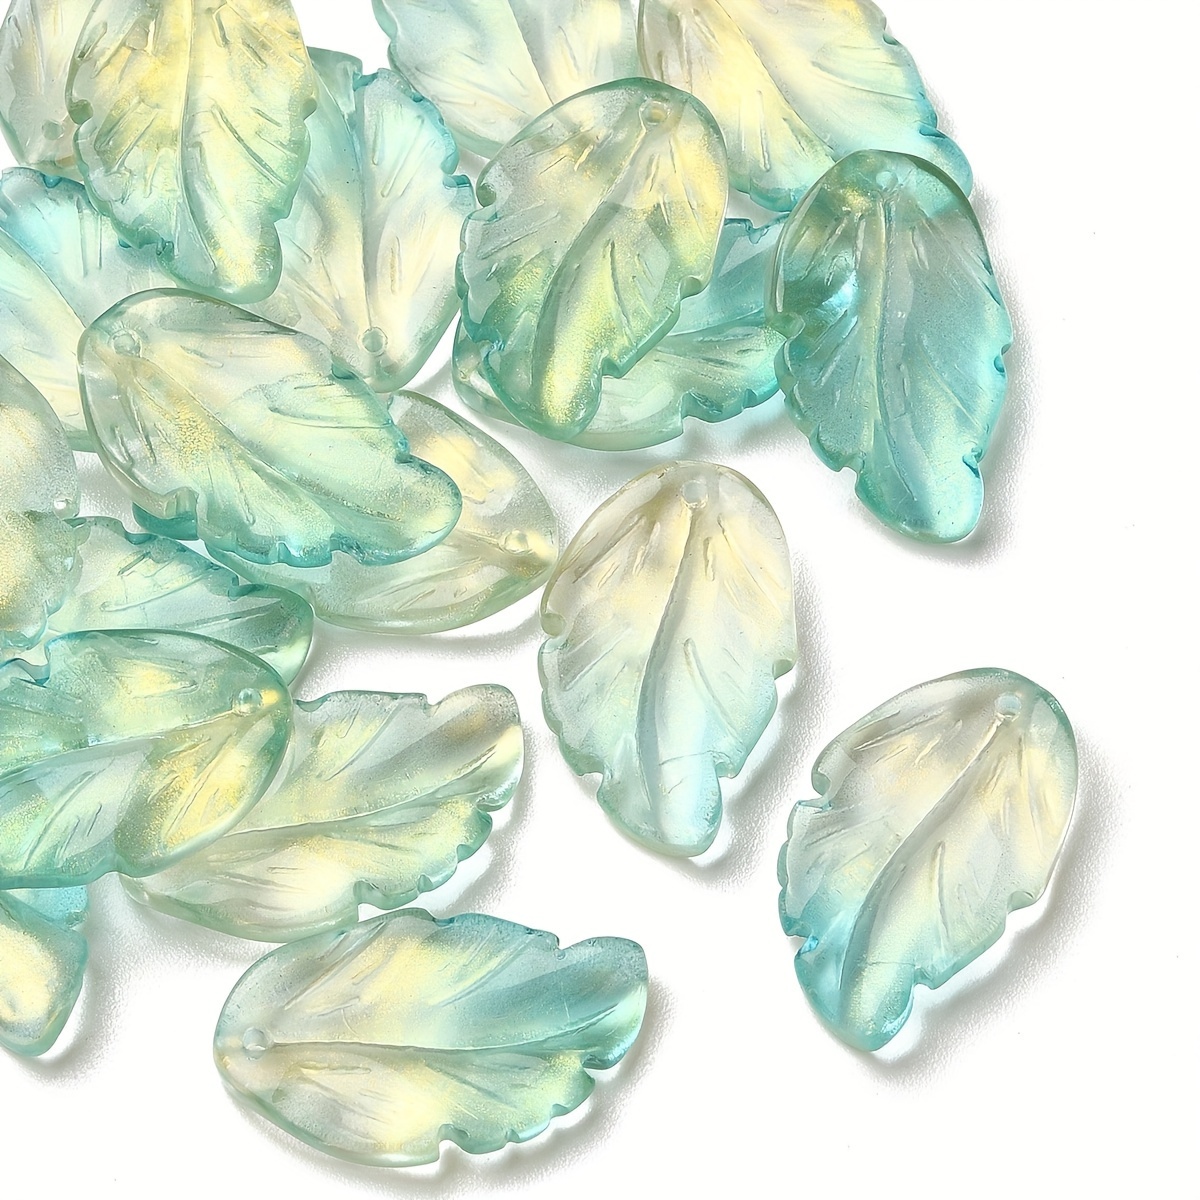 

20pcs Transparent Glass Feather Leaf Pendant Colorful Spring Leaf Charms For Diy Jewelry Accessories Earrings Bracelet Necklace Jewelry Making